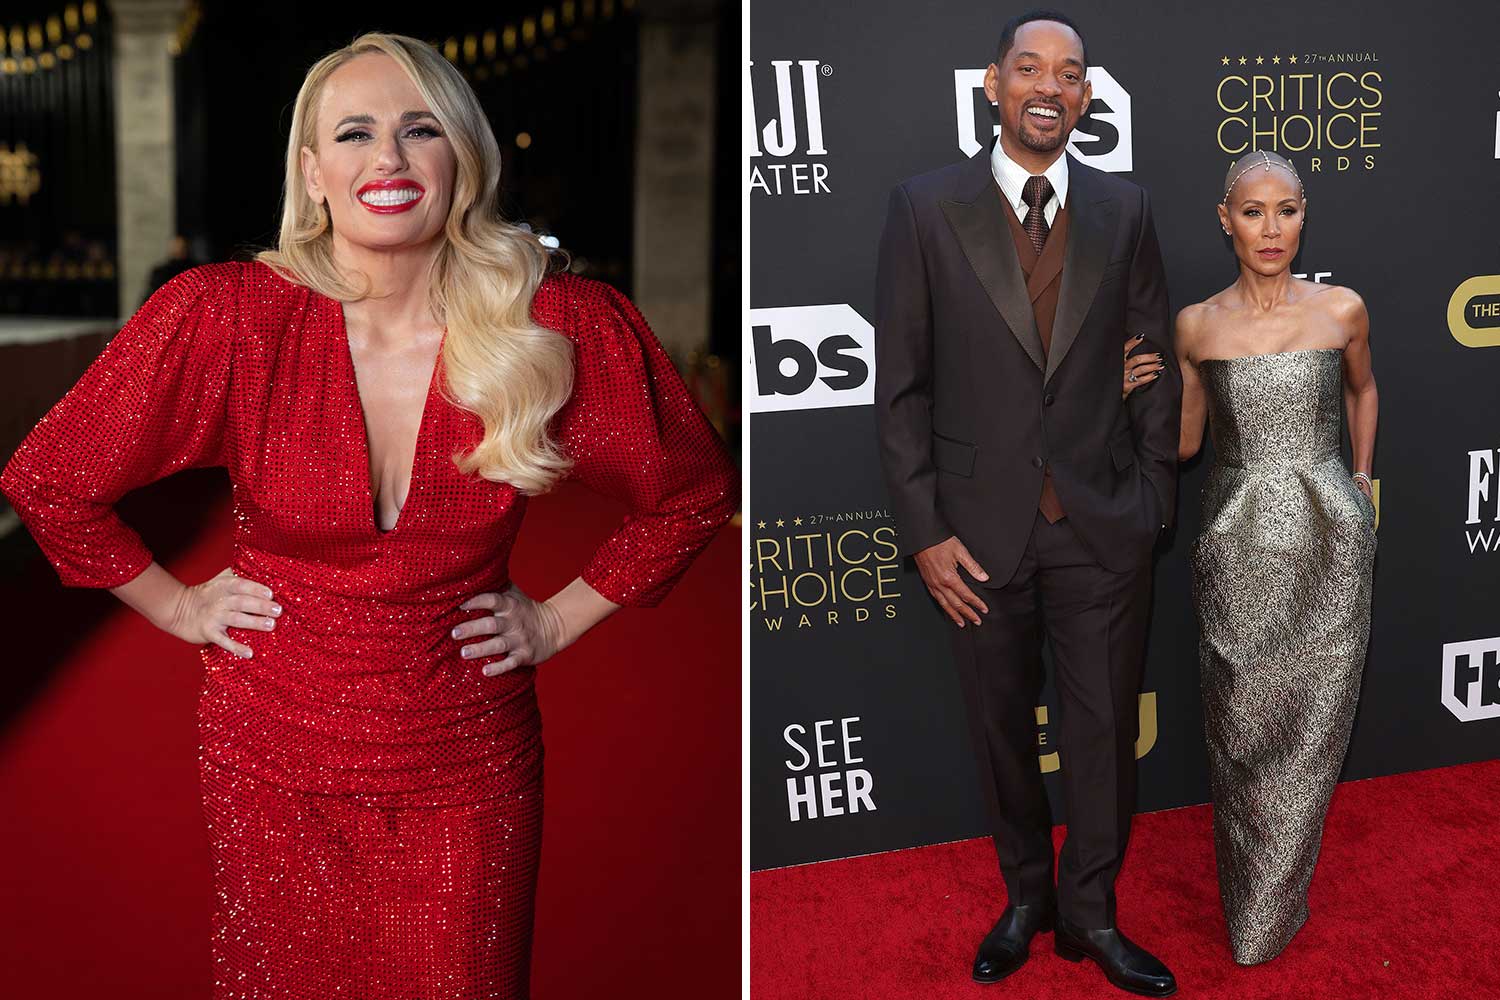 Will Smith blasts Rebel Wilson’s joke about his marriage at the Baftas